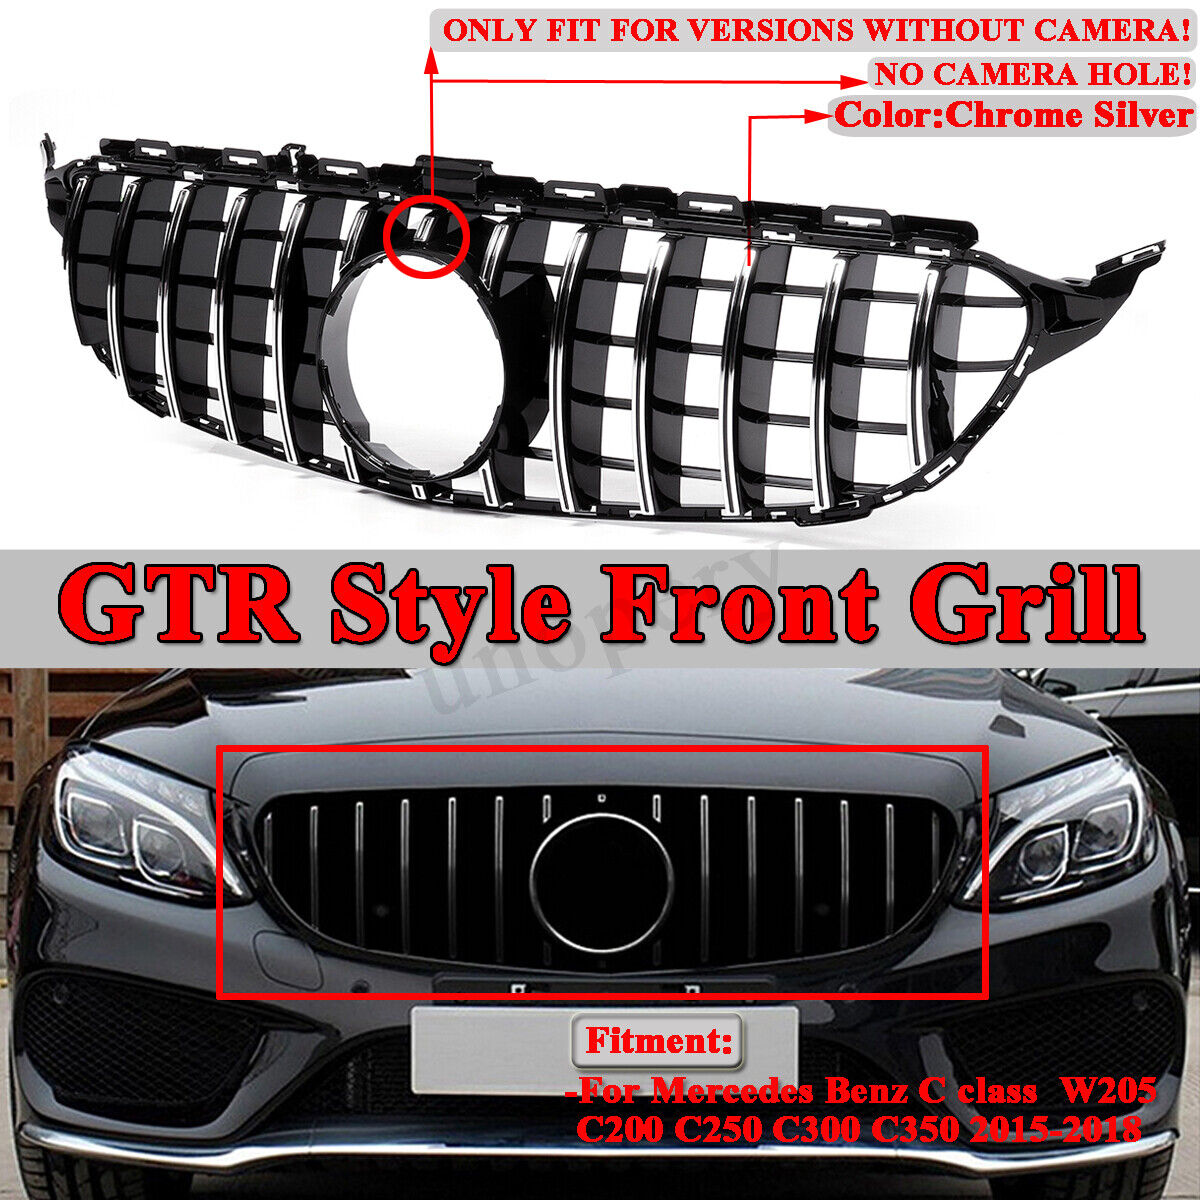 GT R AMG Style Grill Grille Front Bumper for Mercedes Benz W205 C250 C300 C400 